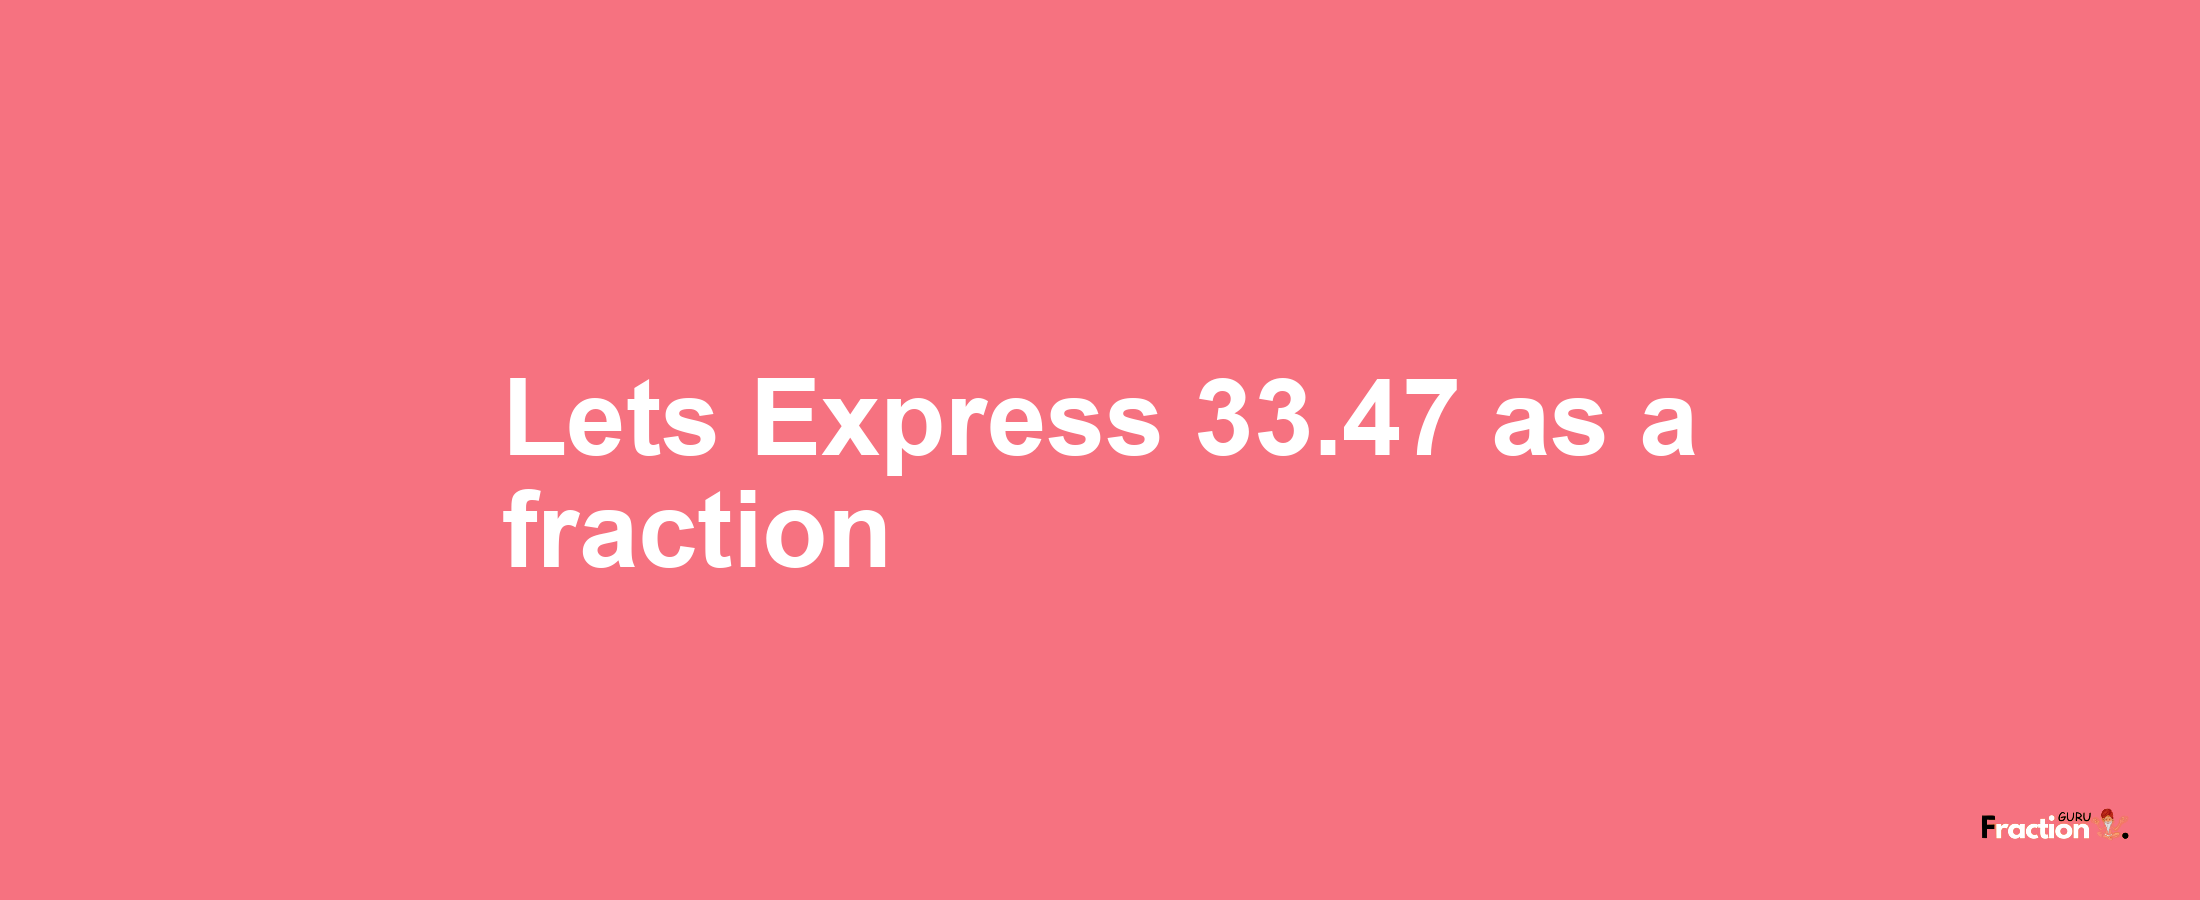 Lets Express 33.47 as afraction